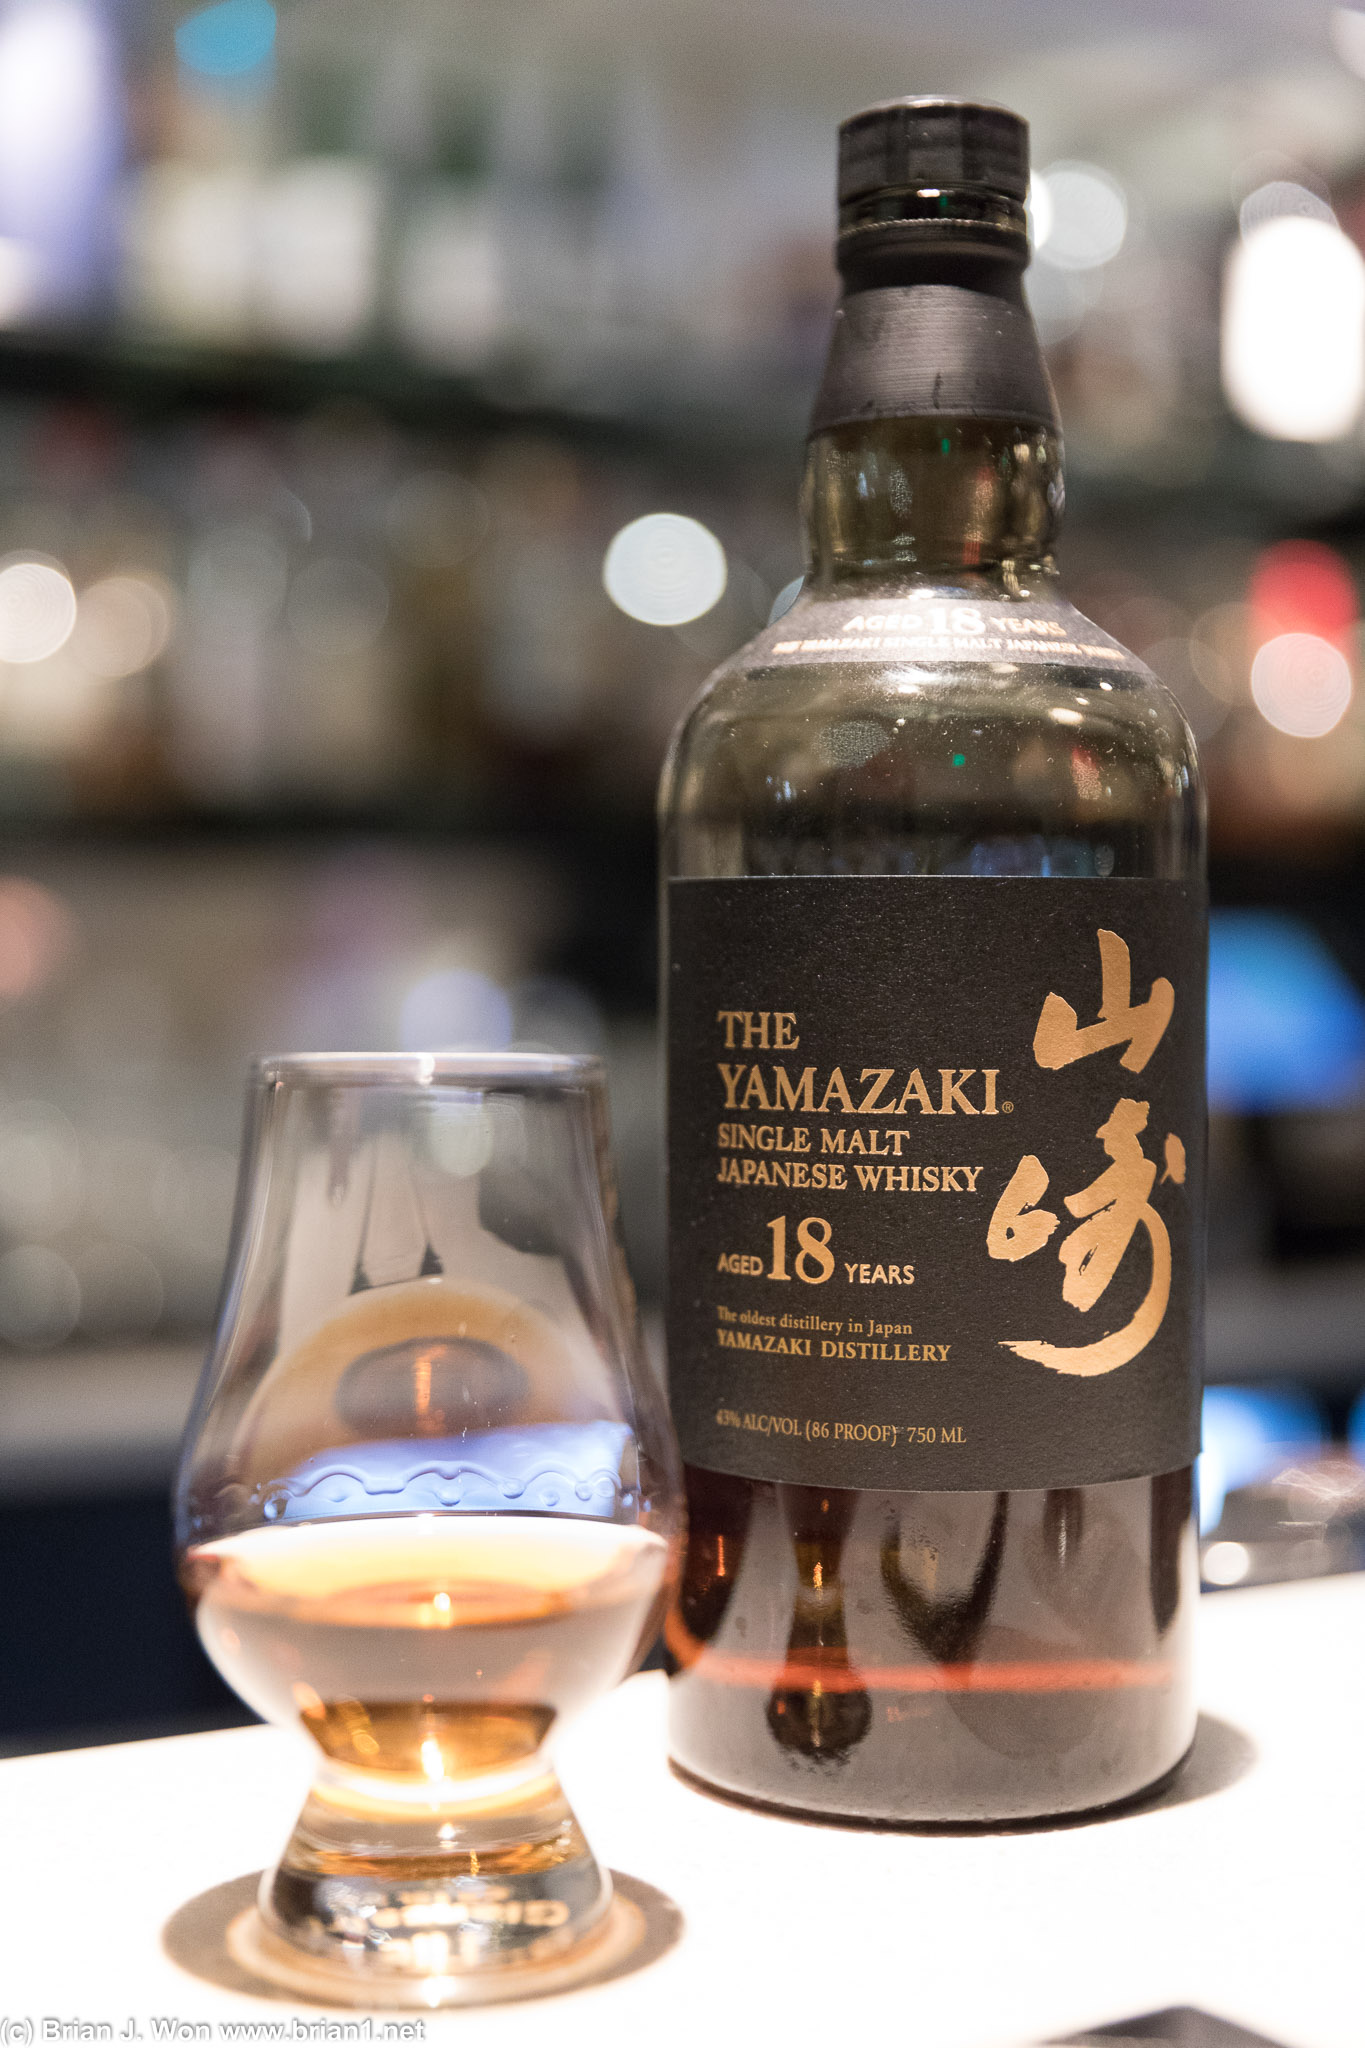 Finding a place with Yamakazi 18 in stock and at a non-crazy price deserves a second picture.